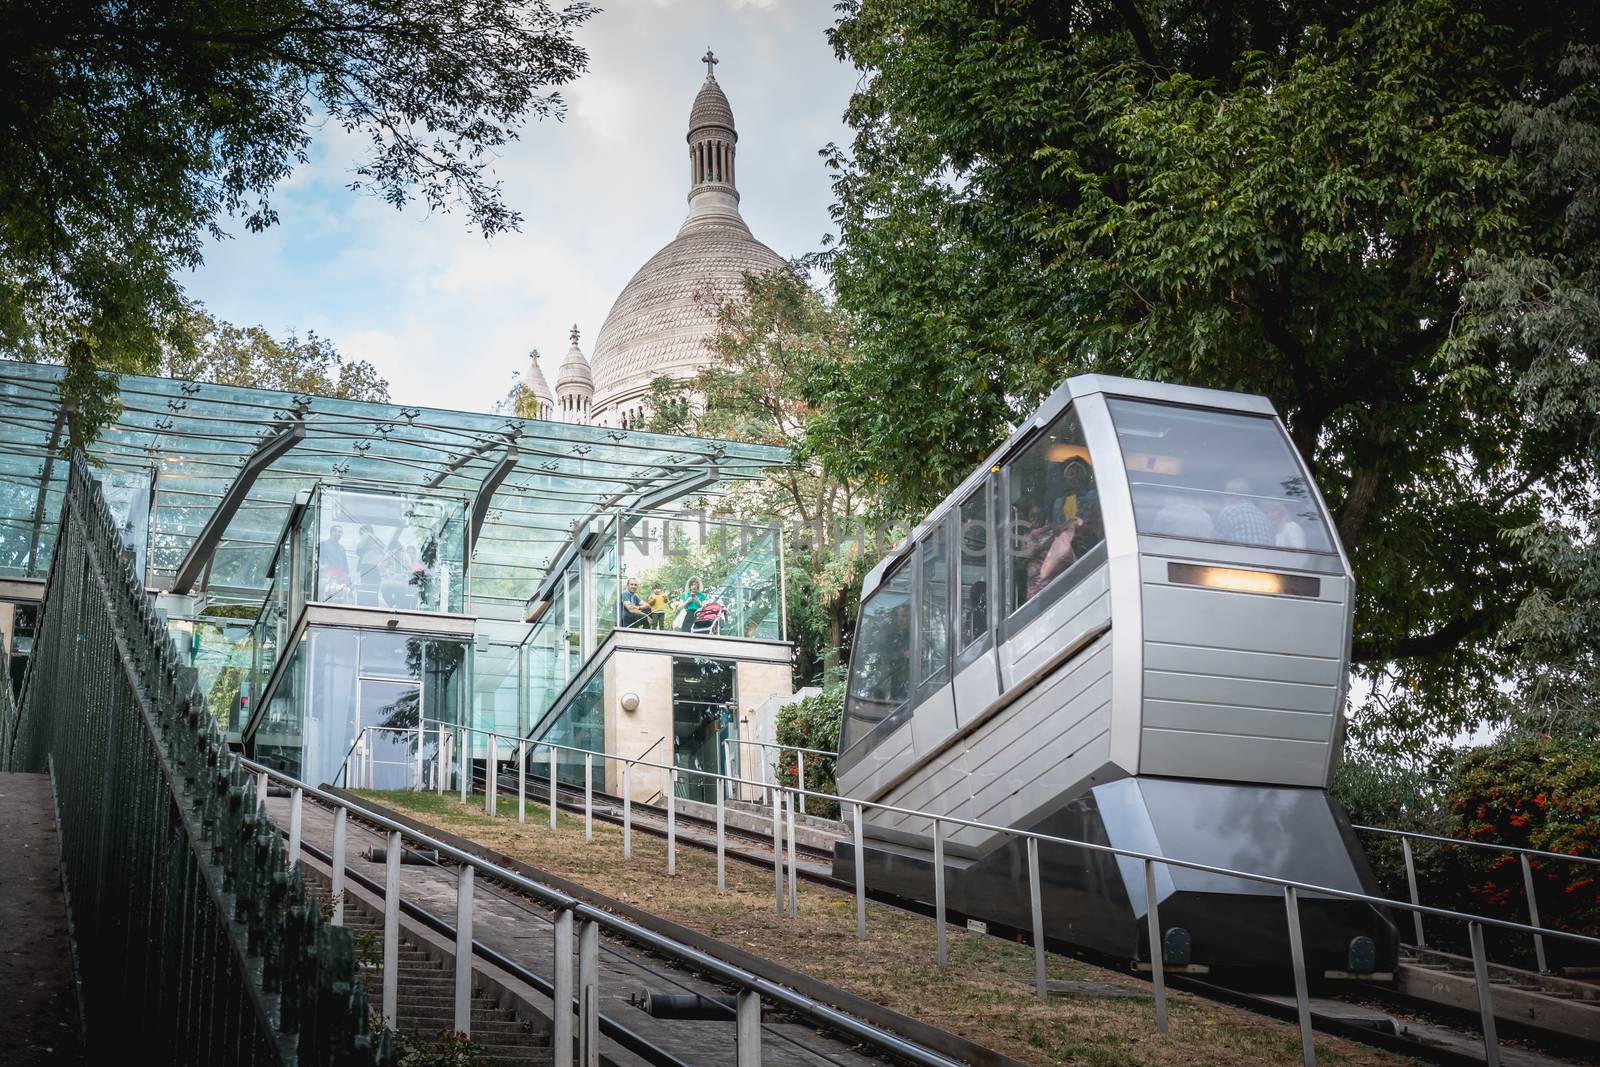 Paris, France - October 6, 2018: view of the funicular of Montmartre which allows to climb to the top of the hill Montmartre and to access the basilica of the Sacred Heart